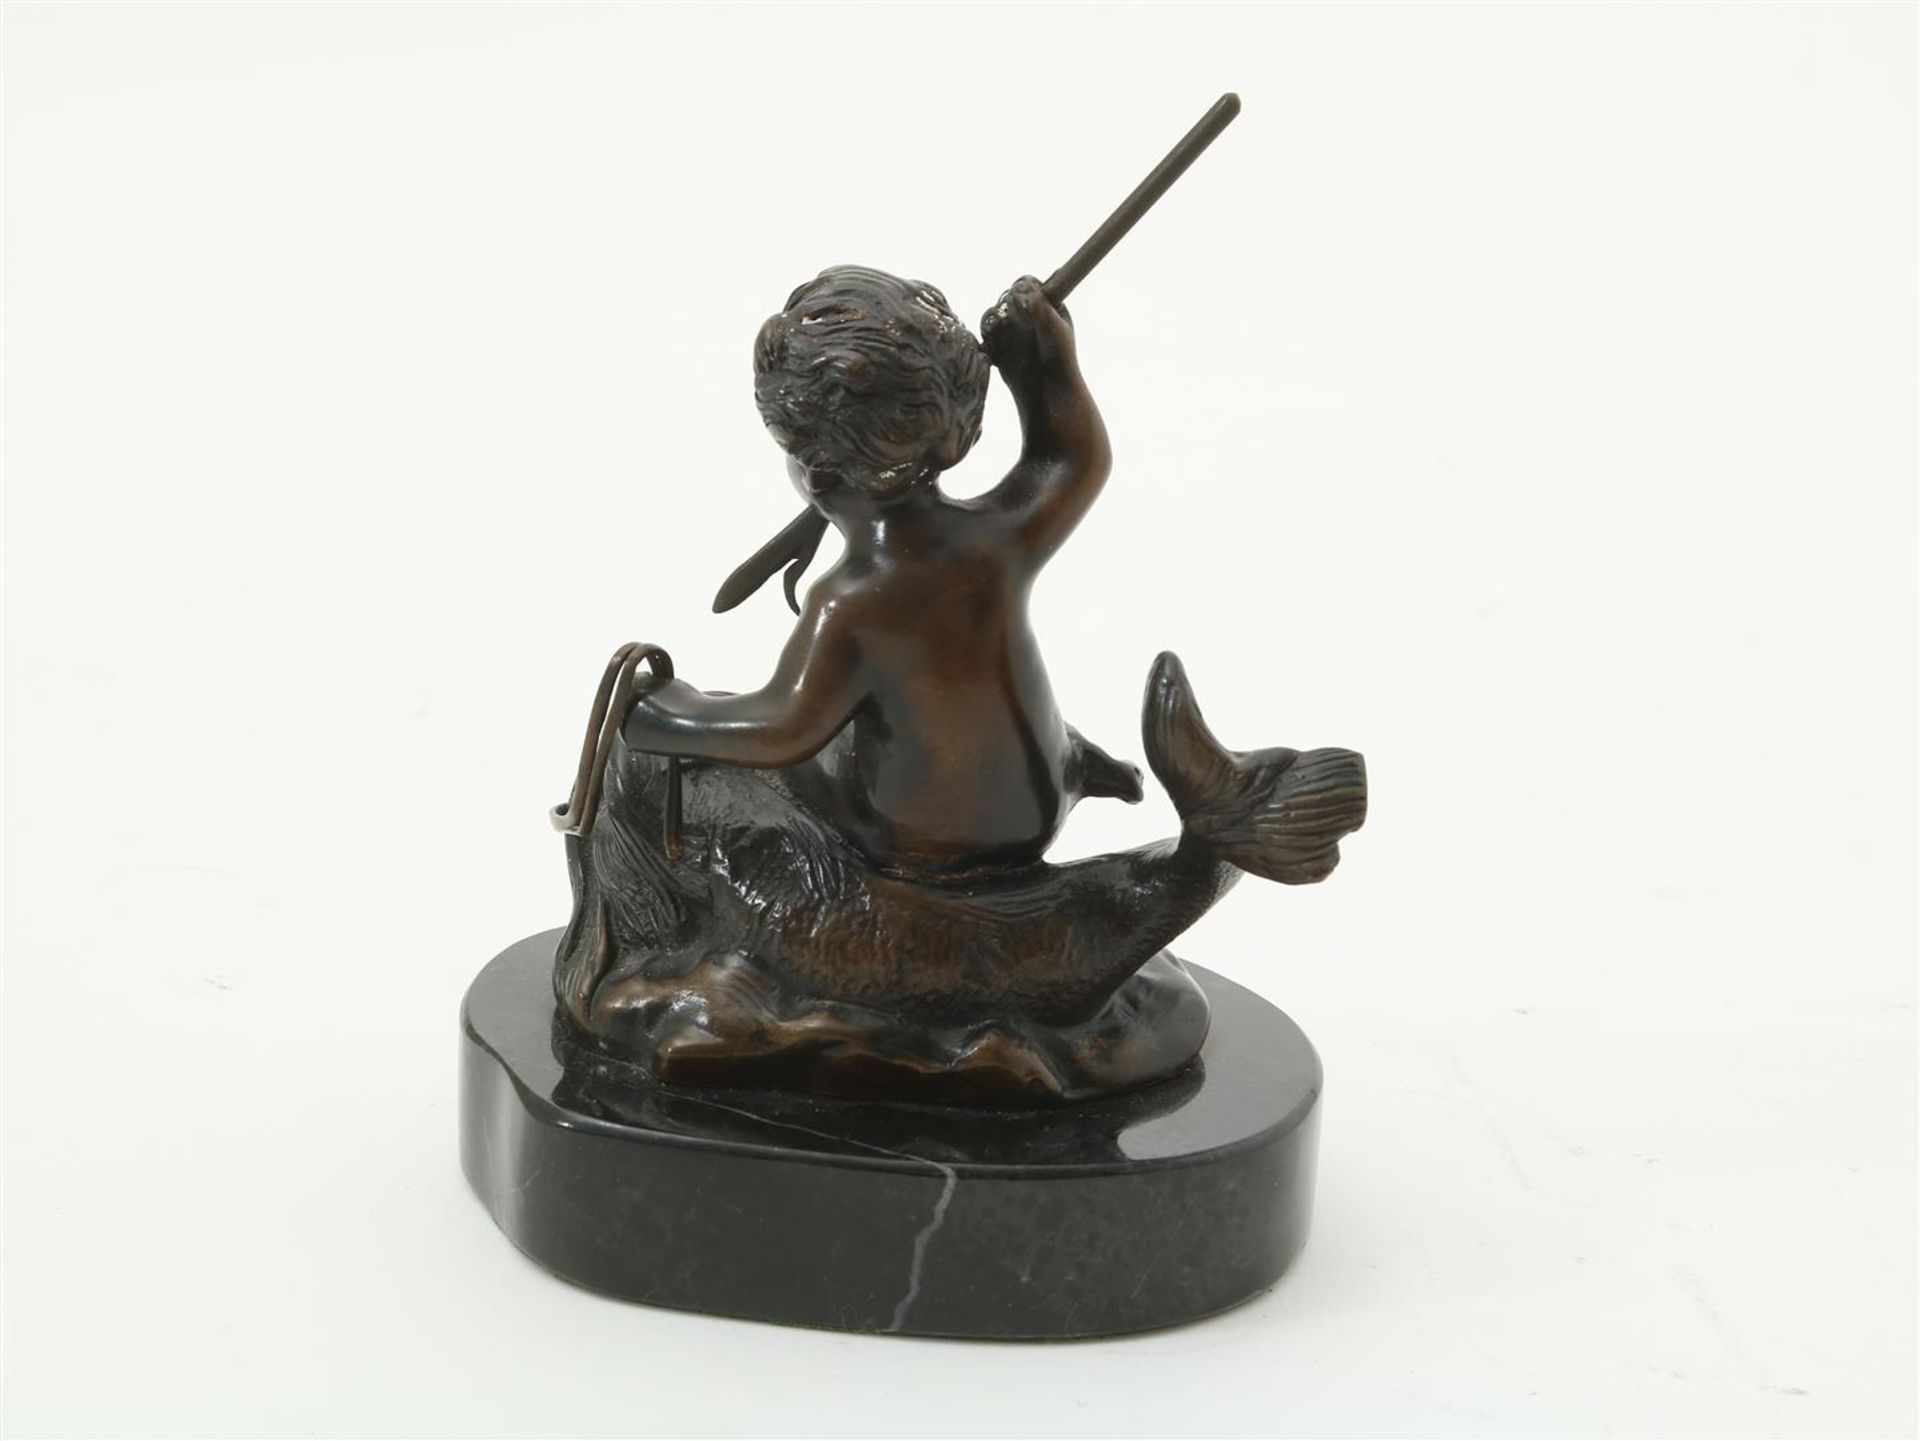 Bronze sculpture of Poseidon on sea monster and marble base, 14 x 10 x 8 cm. - Image 3 of 3